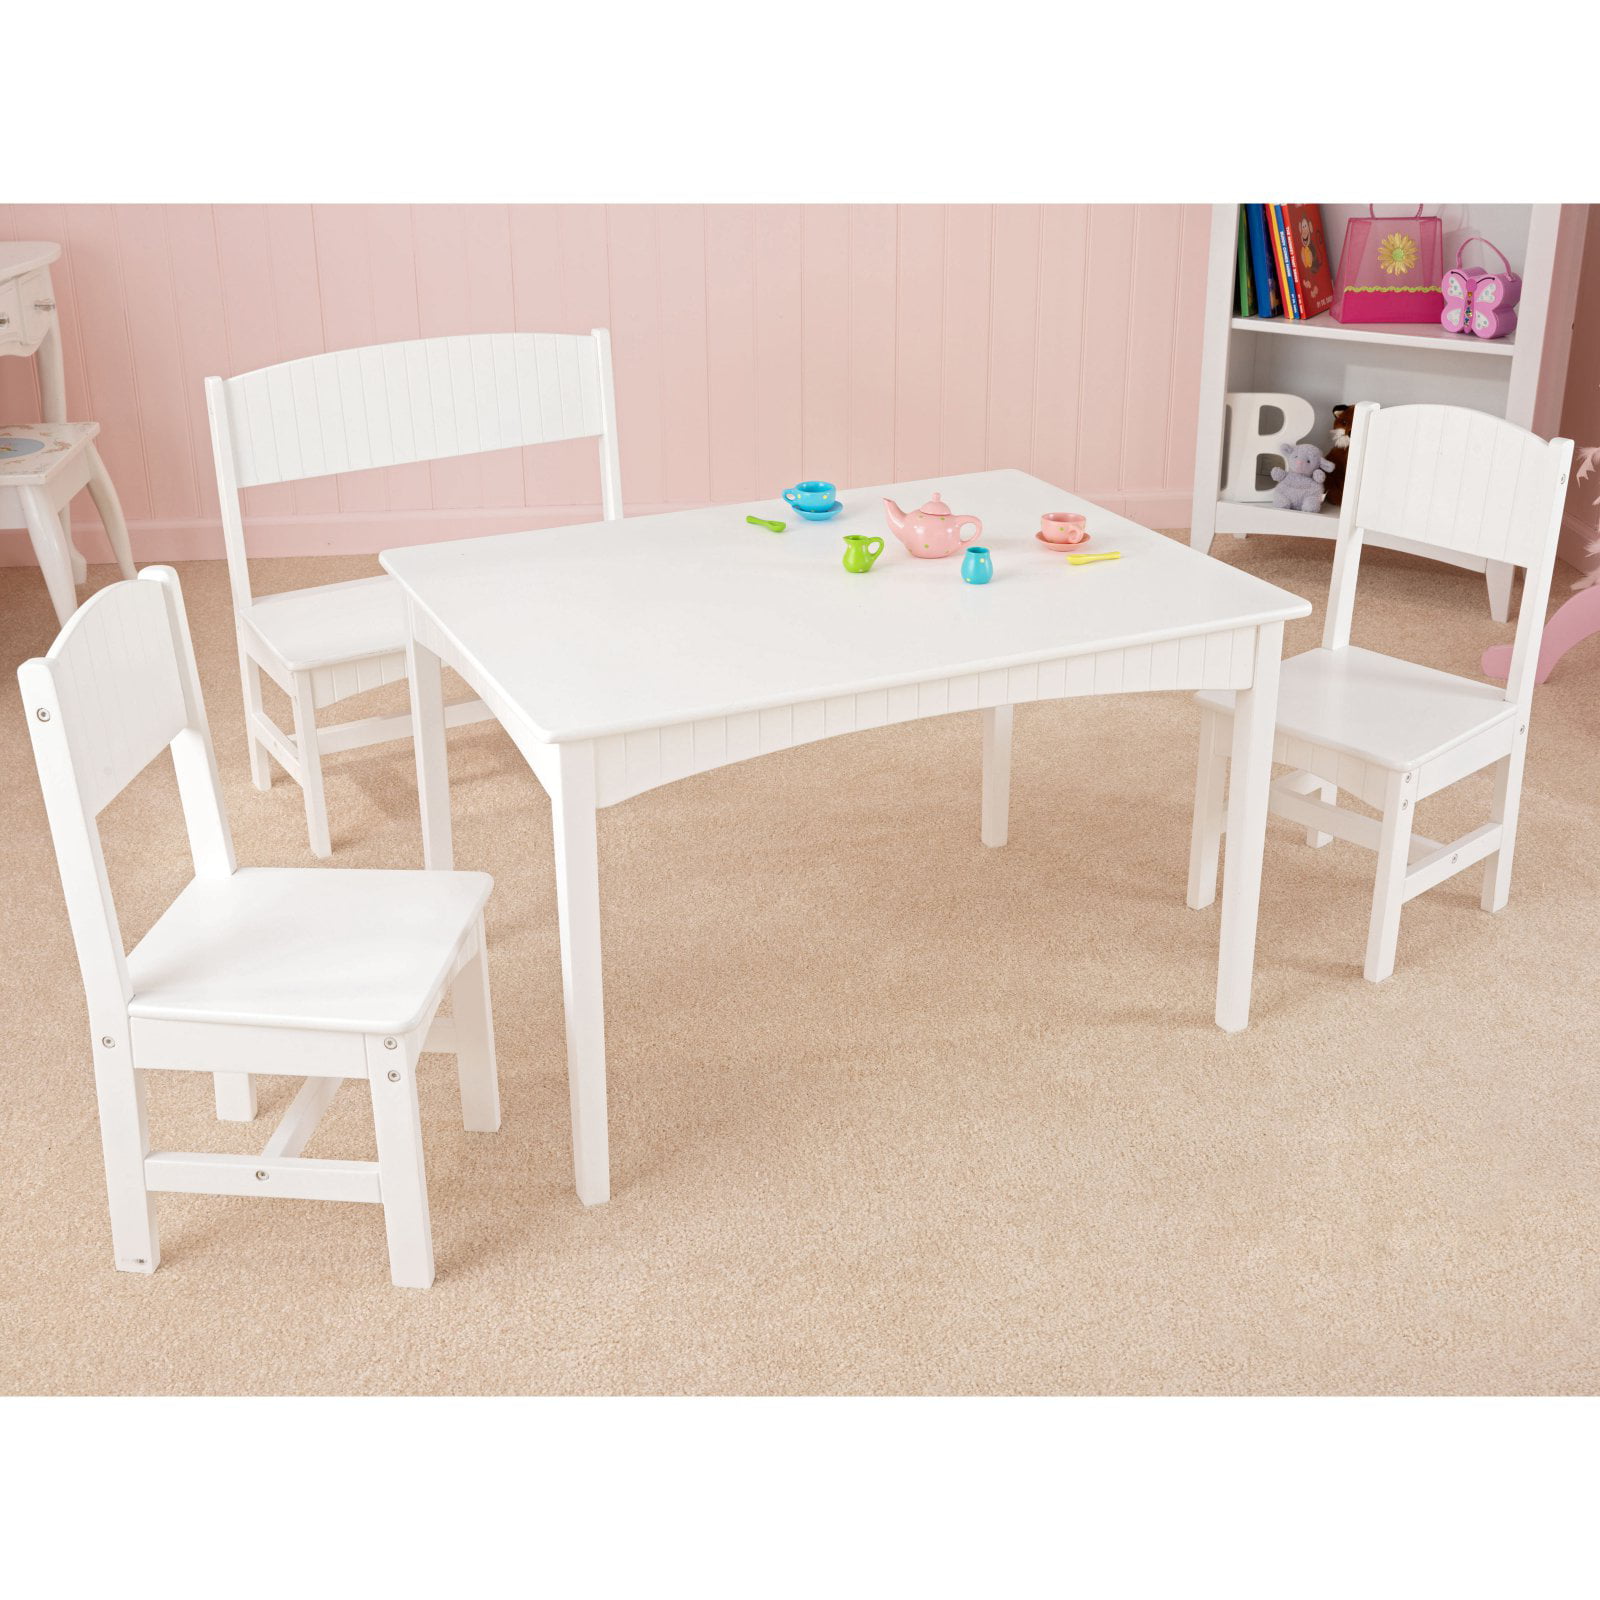 kidkraft nantucket table with bench and chairs